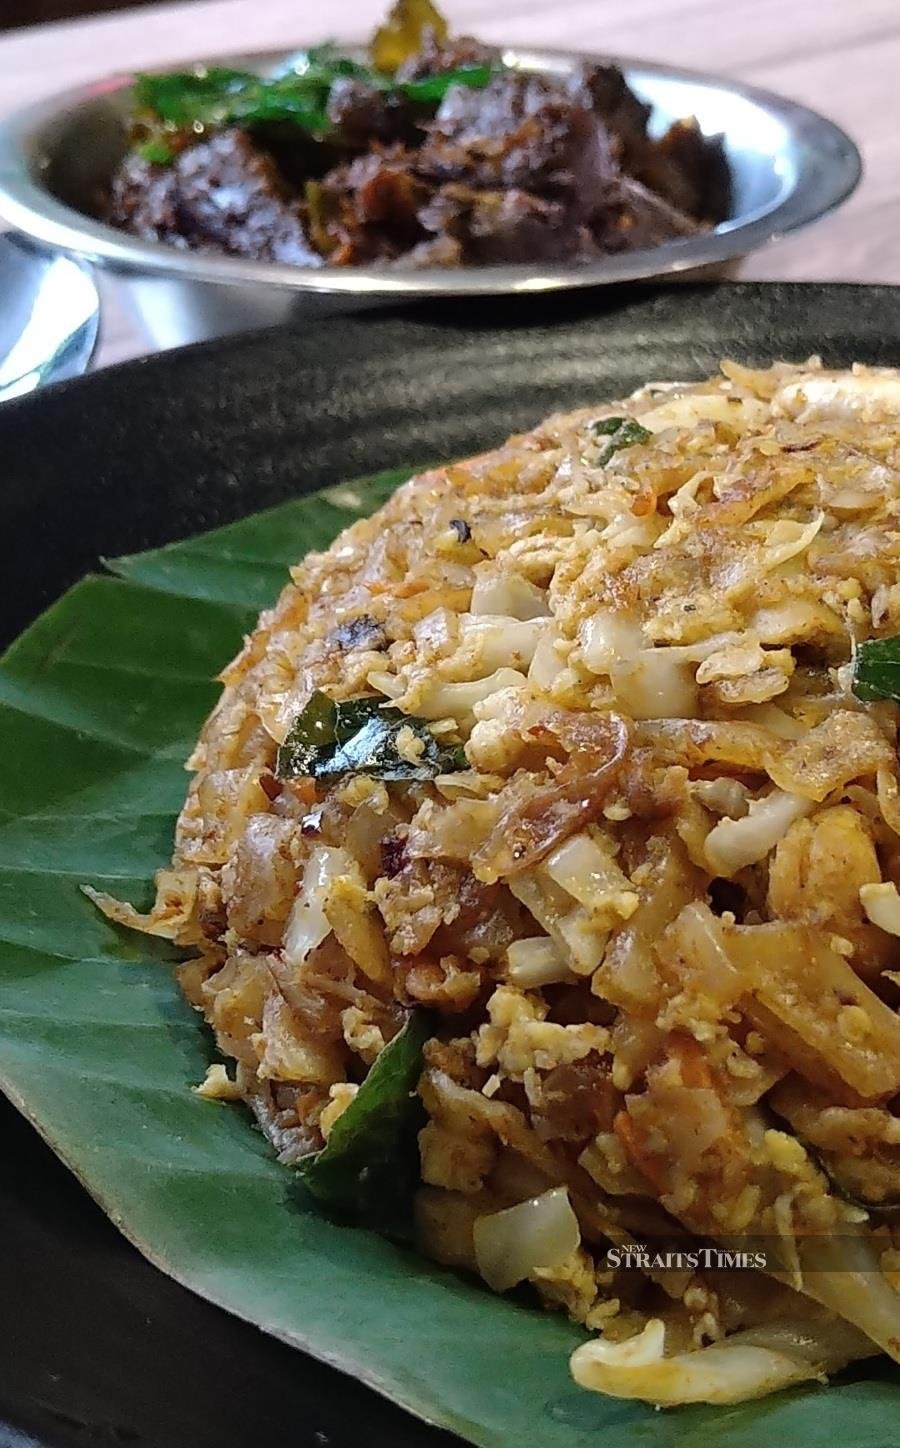 No, this is not char kway teow but it’s Chicken Kottu. Background is Mutton Varuval.